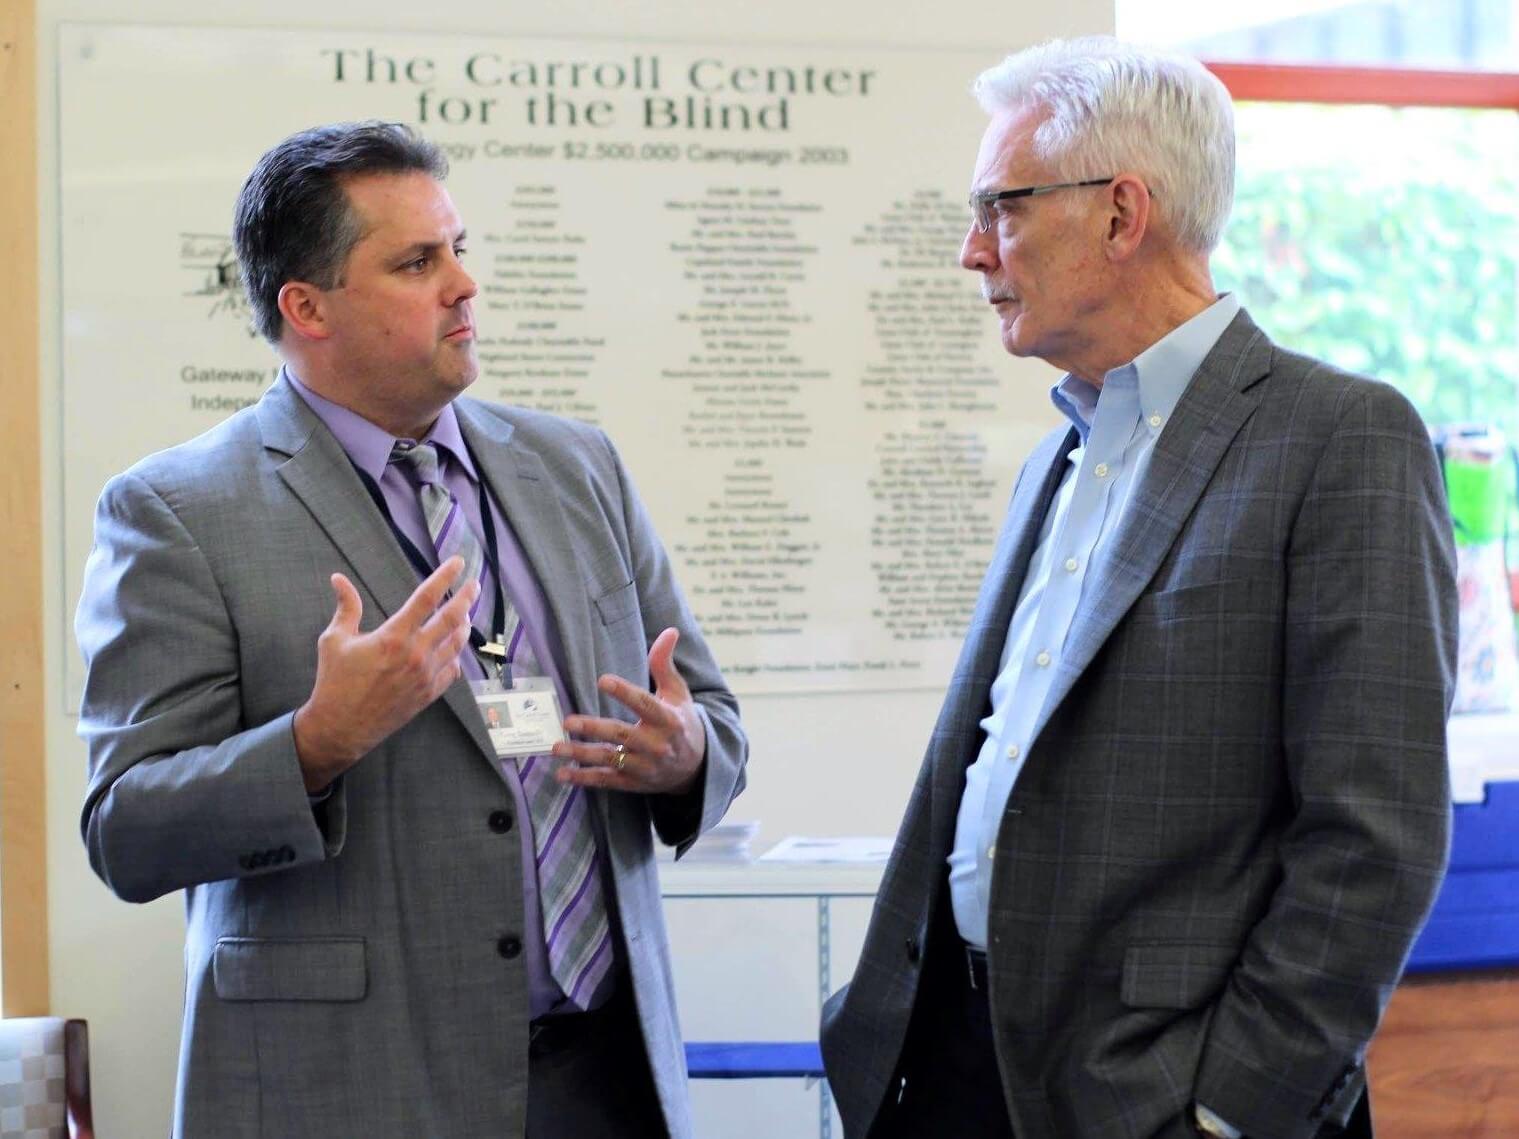 Gregory J. Donnelly (left), Carroll Center for the Blind President and CEO, talks with Thomas A. Croswell, Tufts Health Plan President and CEO in the lobby of the Rachel E. Rosenbaum Technology Center.